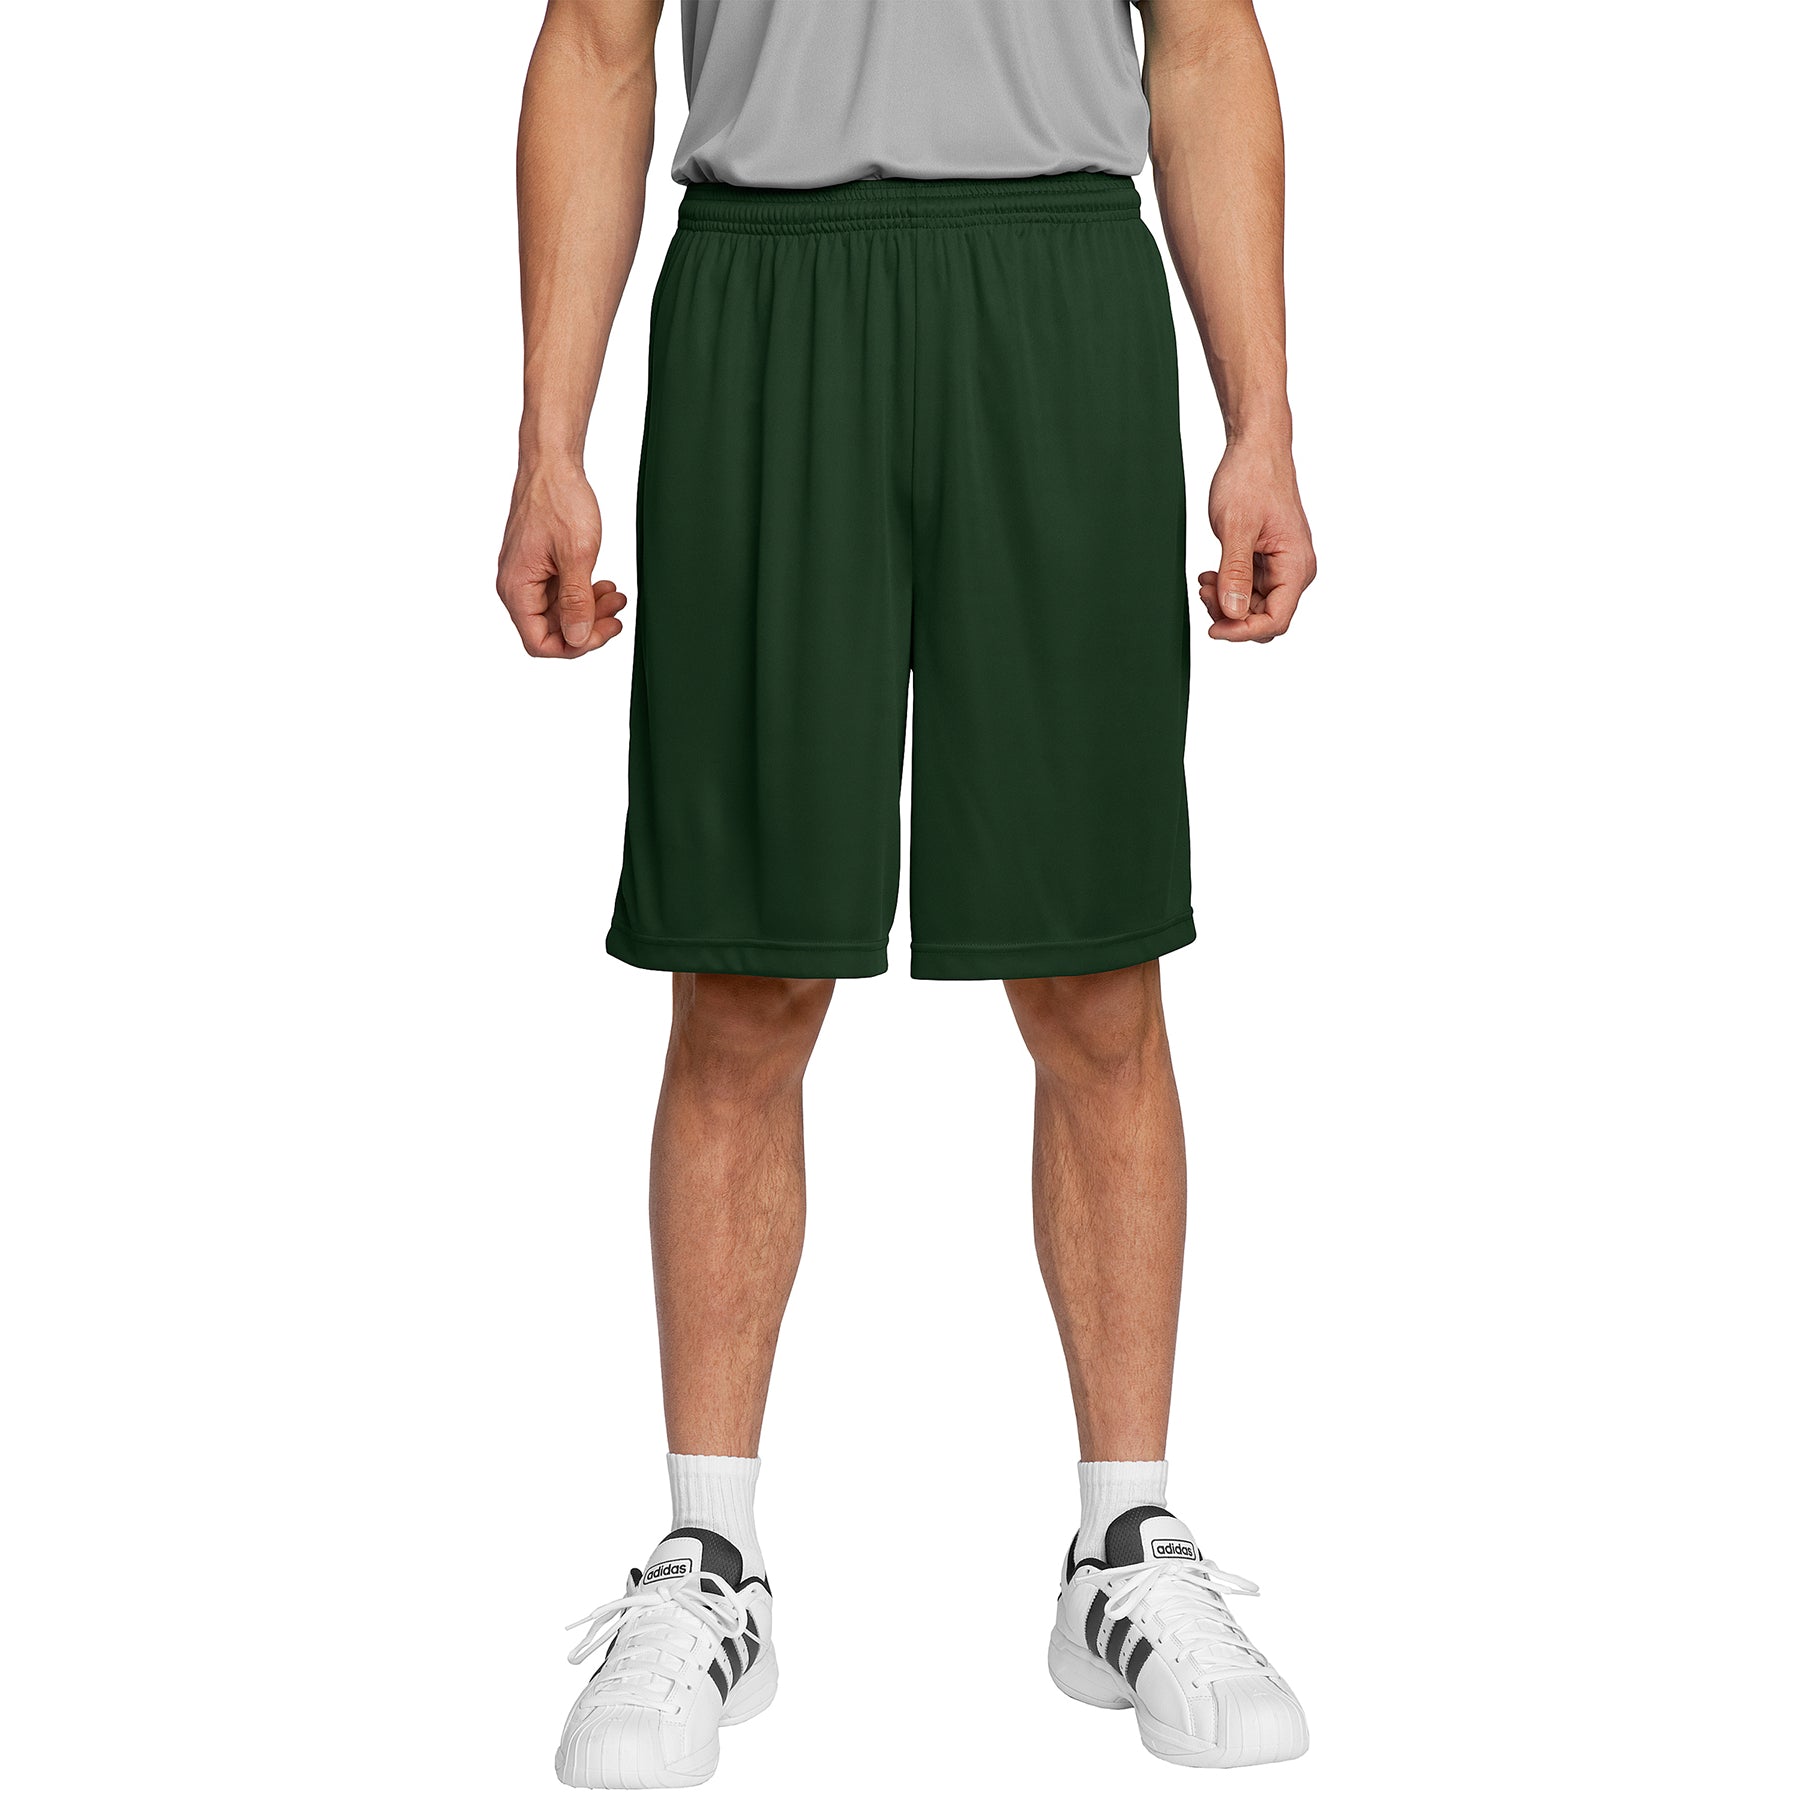 Men's PosiCharge Competitor Short Forest Green Front